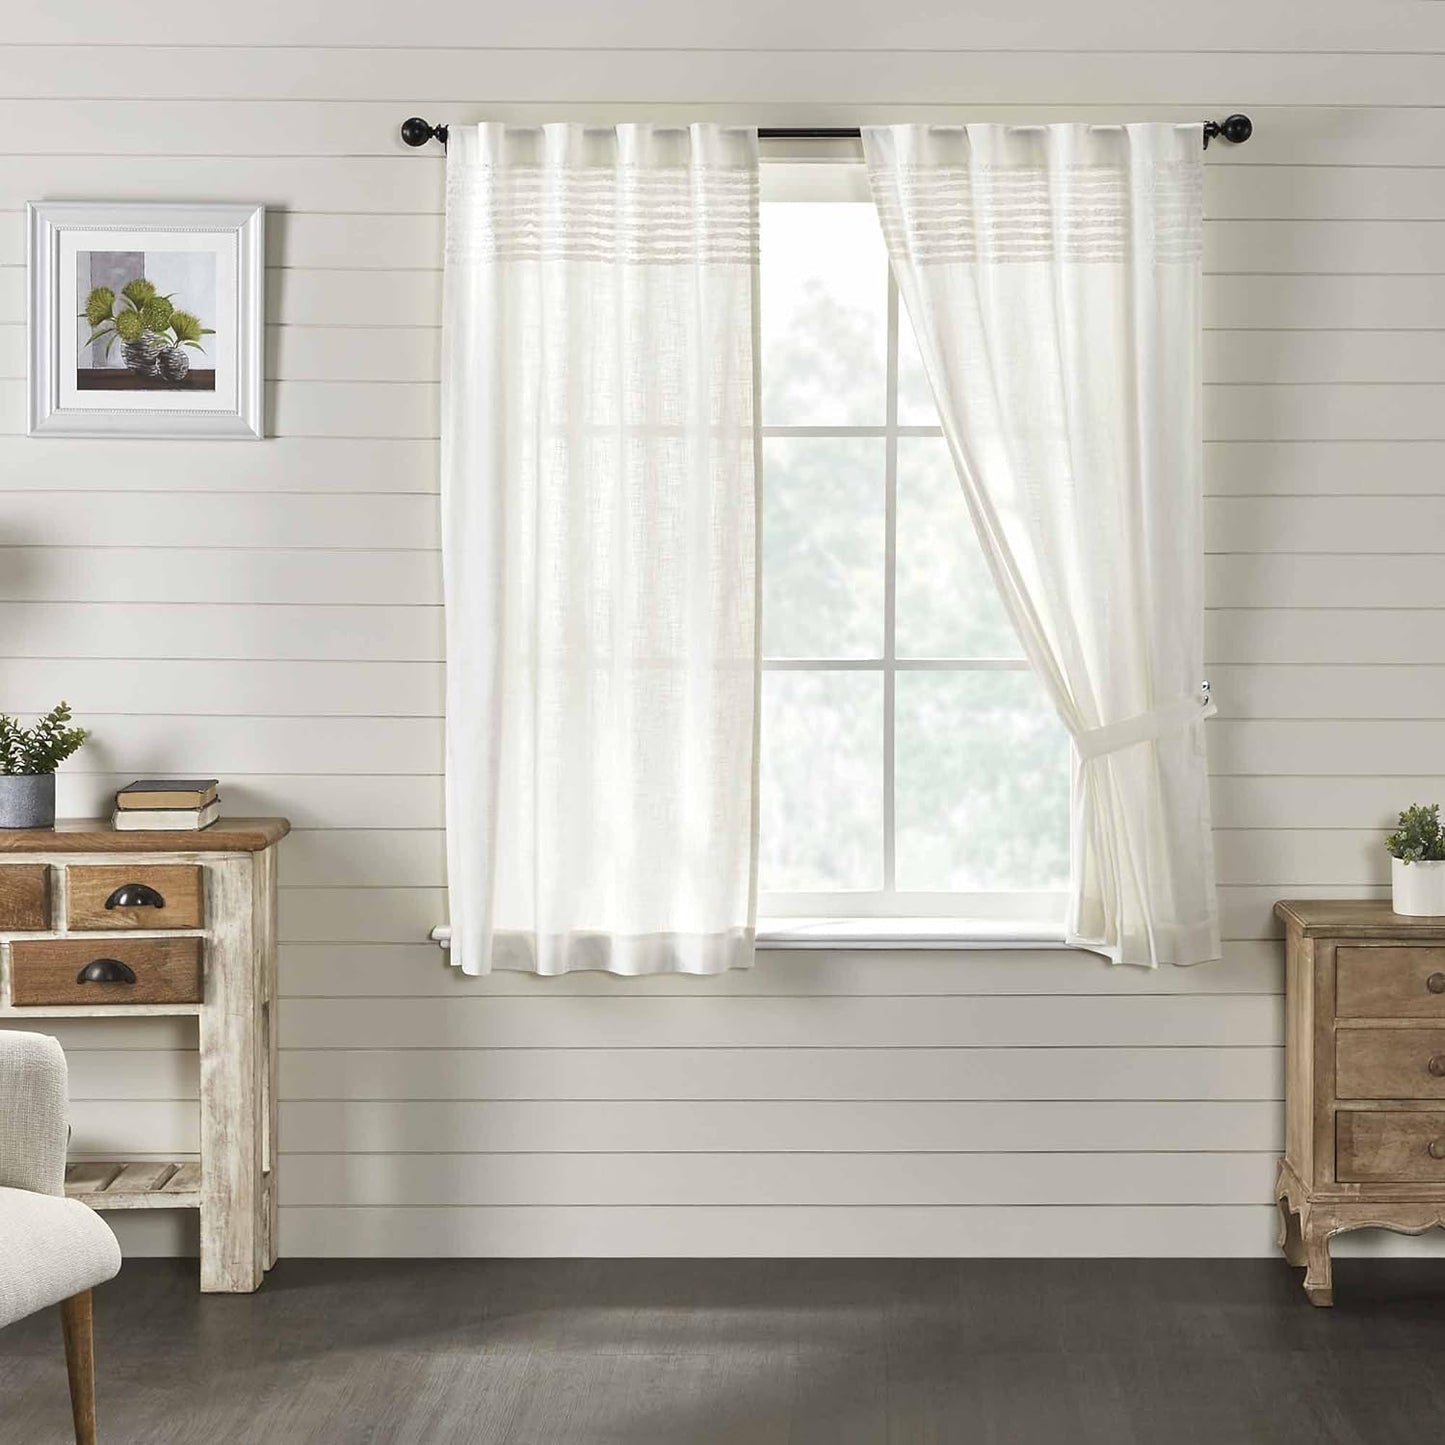 Piper Classics Kathryn Prairie Swags, Set of 2, 36" Long, Gathered Curtains with Drawstring in a Linen-Look Soft White Cotton Semi-Sheer Fabric, Farmhouse, Cottage, Country Style  Piper Classics 63" Panels  